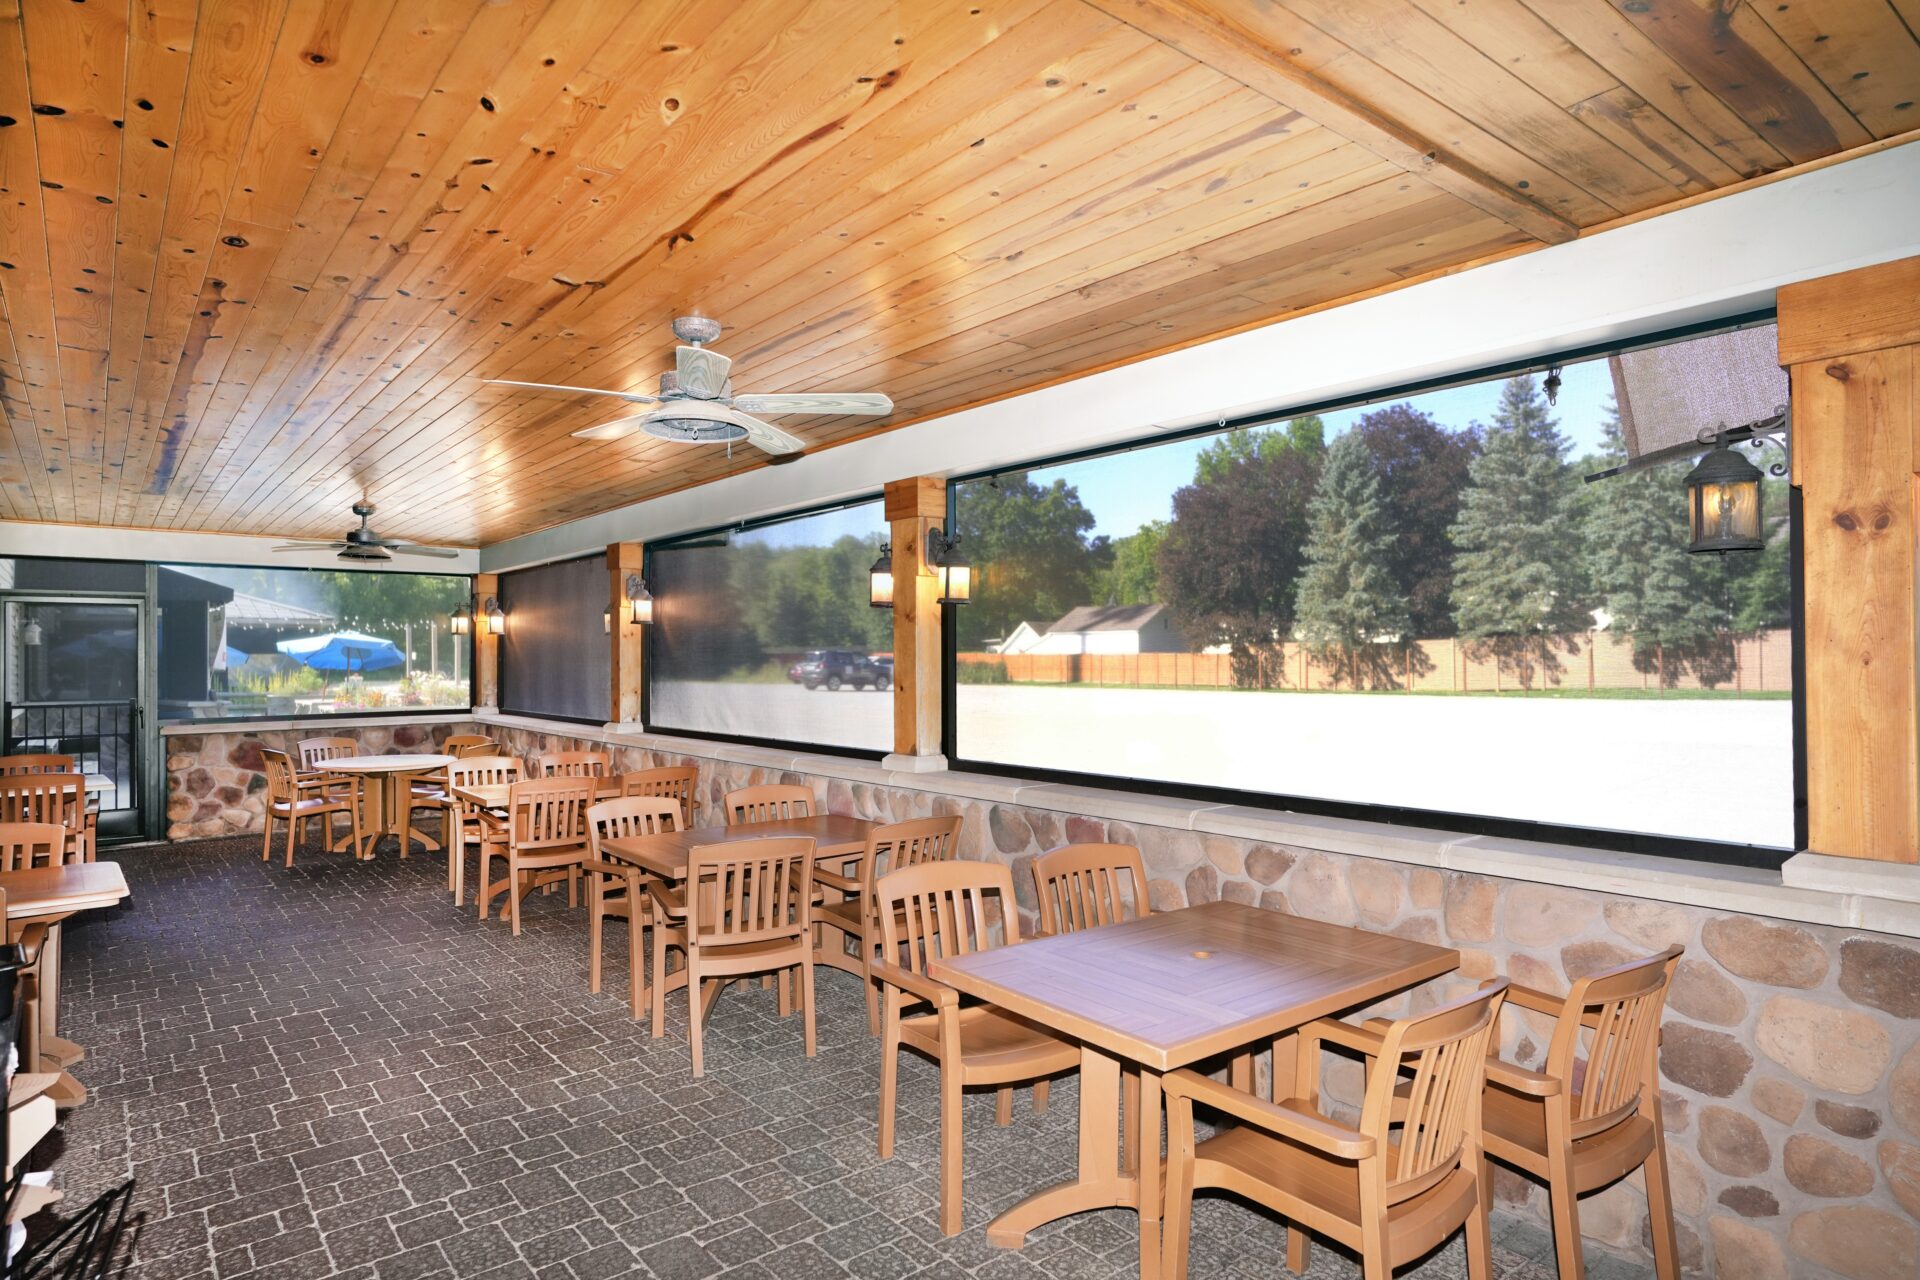 Screening Solutions Ohio installs insect screens on Samosky's Pizza in Valley City, Ohio.